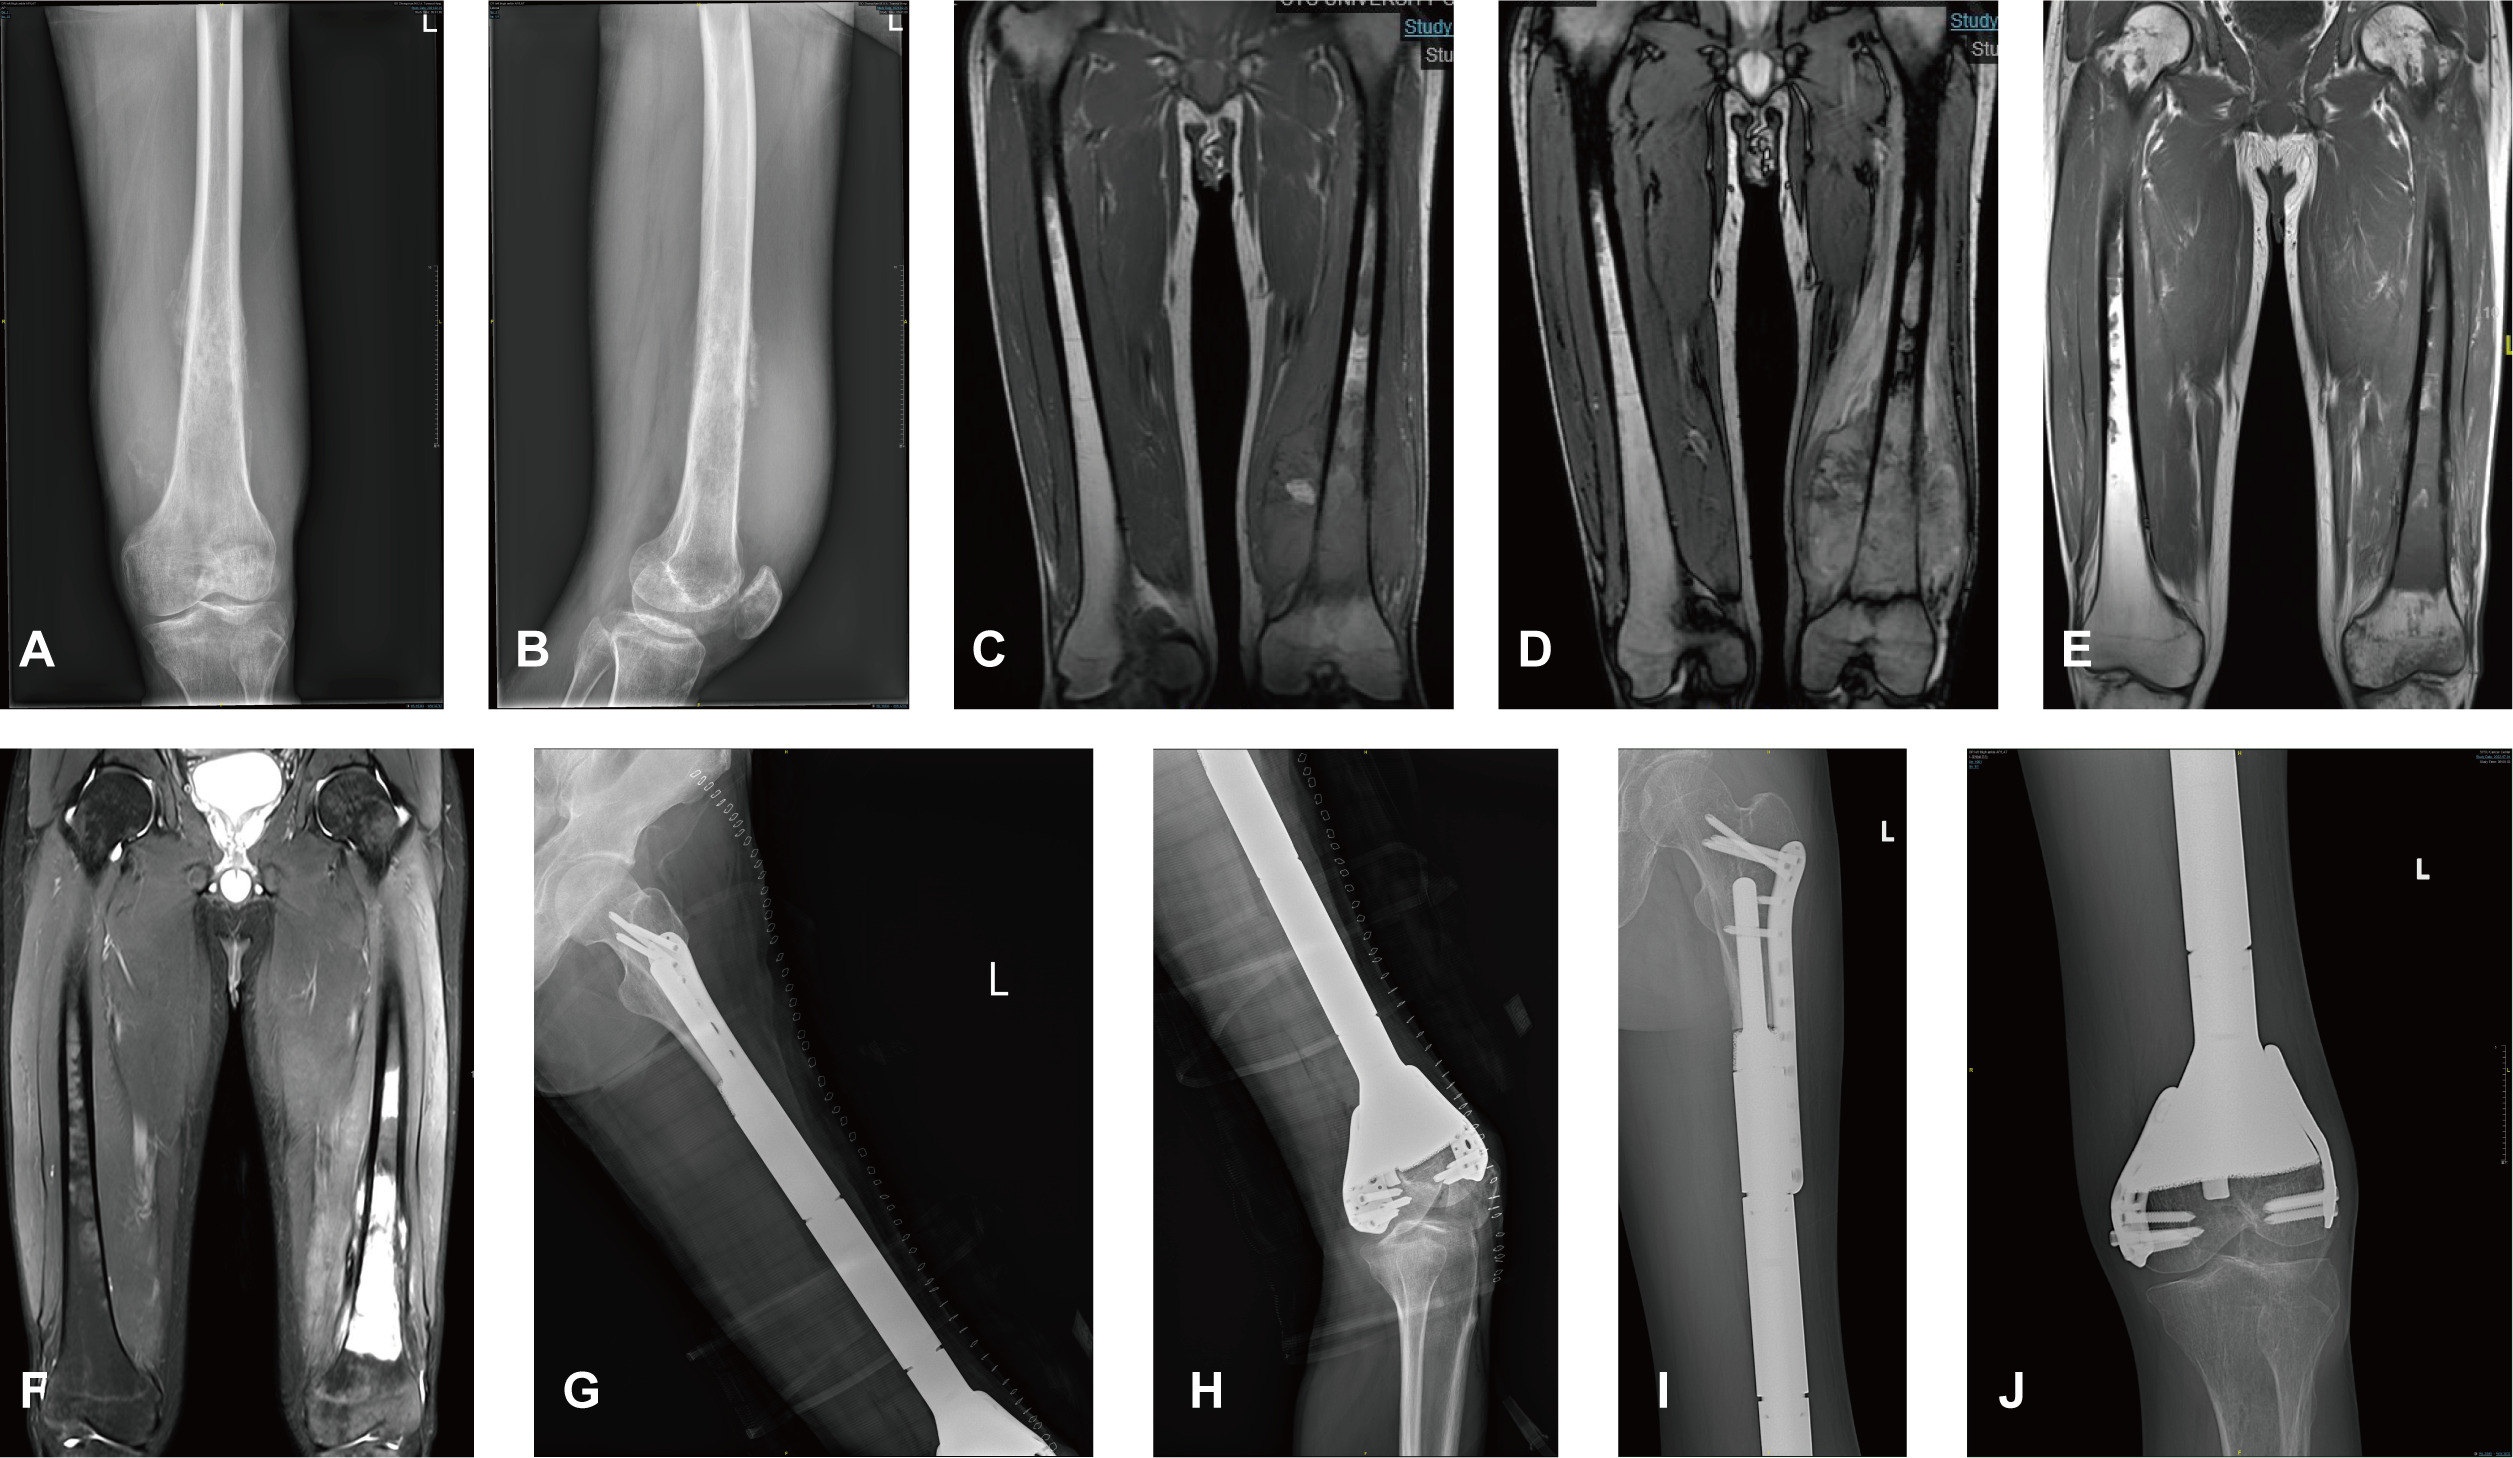 Fig. 2 
              A 31-year-old male patient complained of increasing left thigh pain during the last 12 months, and was found to have Ewing’s sarcoma in the mid-shaft femur. a) and b), preoperative radiographs showing bone destruction of the distal femur. c) and d) T1-weighted and T2-weighted MRI before chemotherapy. e) and f) T1-weighted and T2-weighted MRI after six courses of chemotherapy revealed dramatic shrinkage of the tumour. g) and h) Postoperative radiographs. i) and j) Radiography showed an excellent position of the 3D-printed prosthesis and the Musculoskeletal Tumor Society score was 28 at the 30-month follow-up.
            